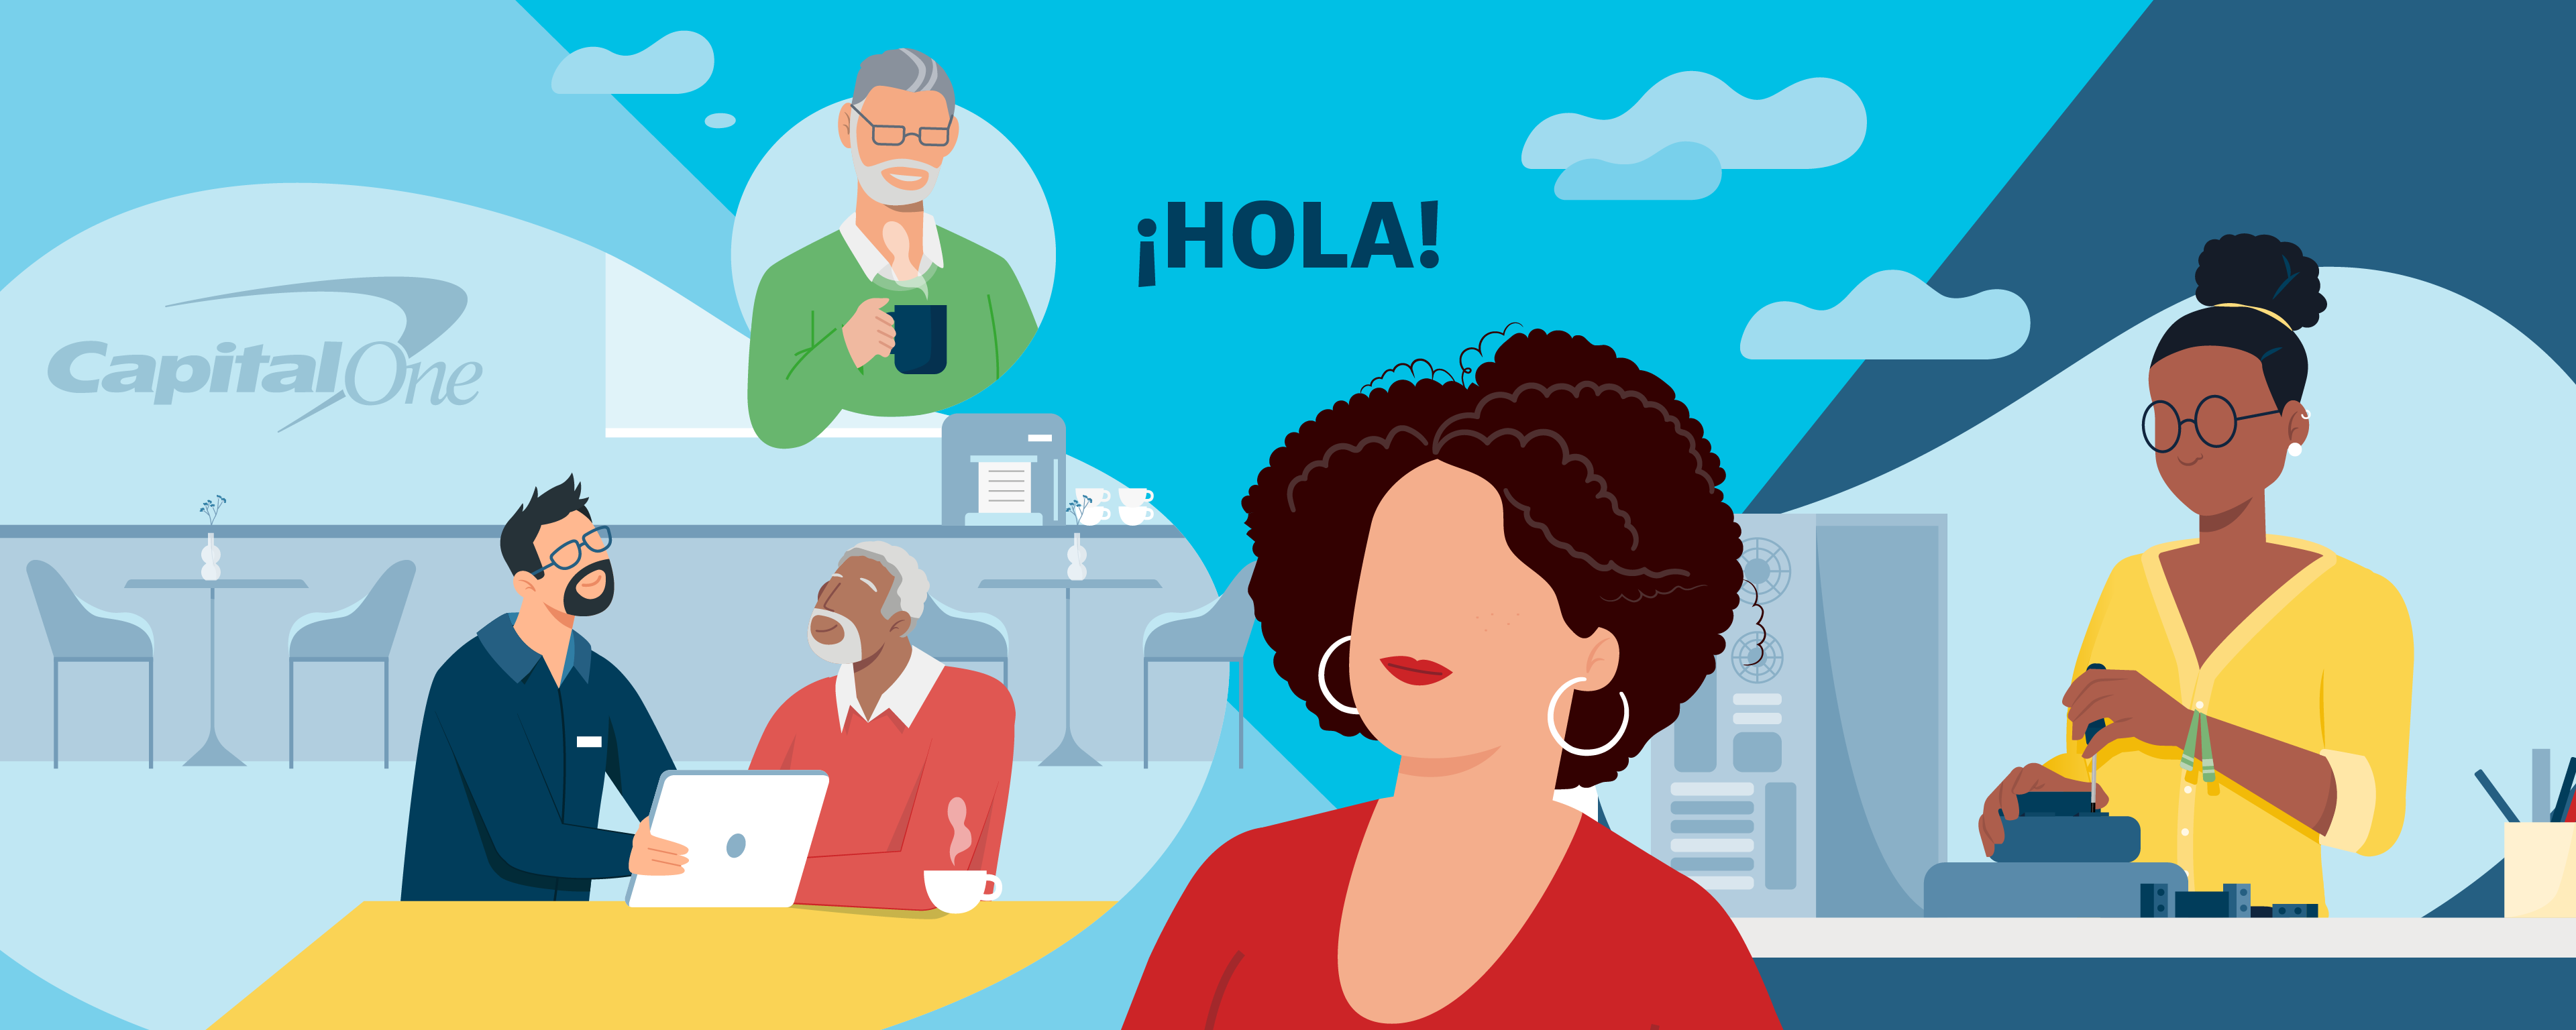 Illustration collage of multiple Capital One associates with the title HOLA!